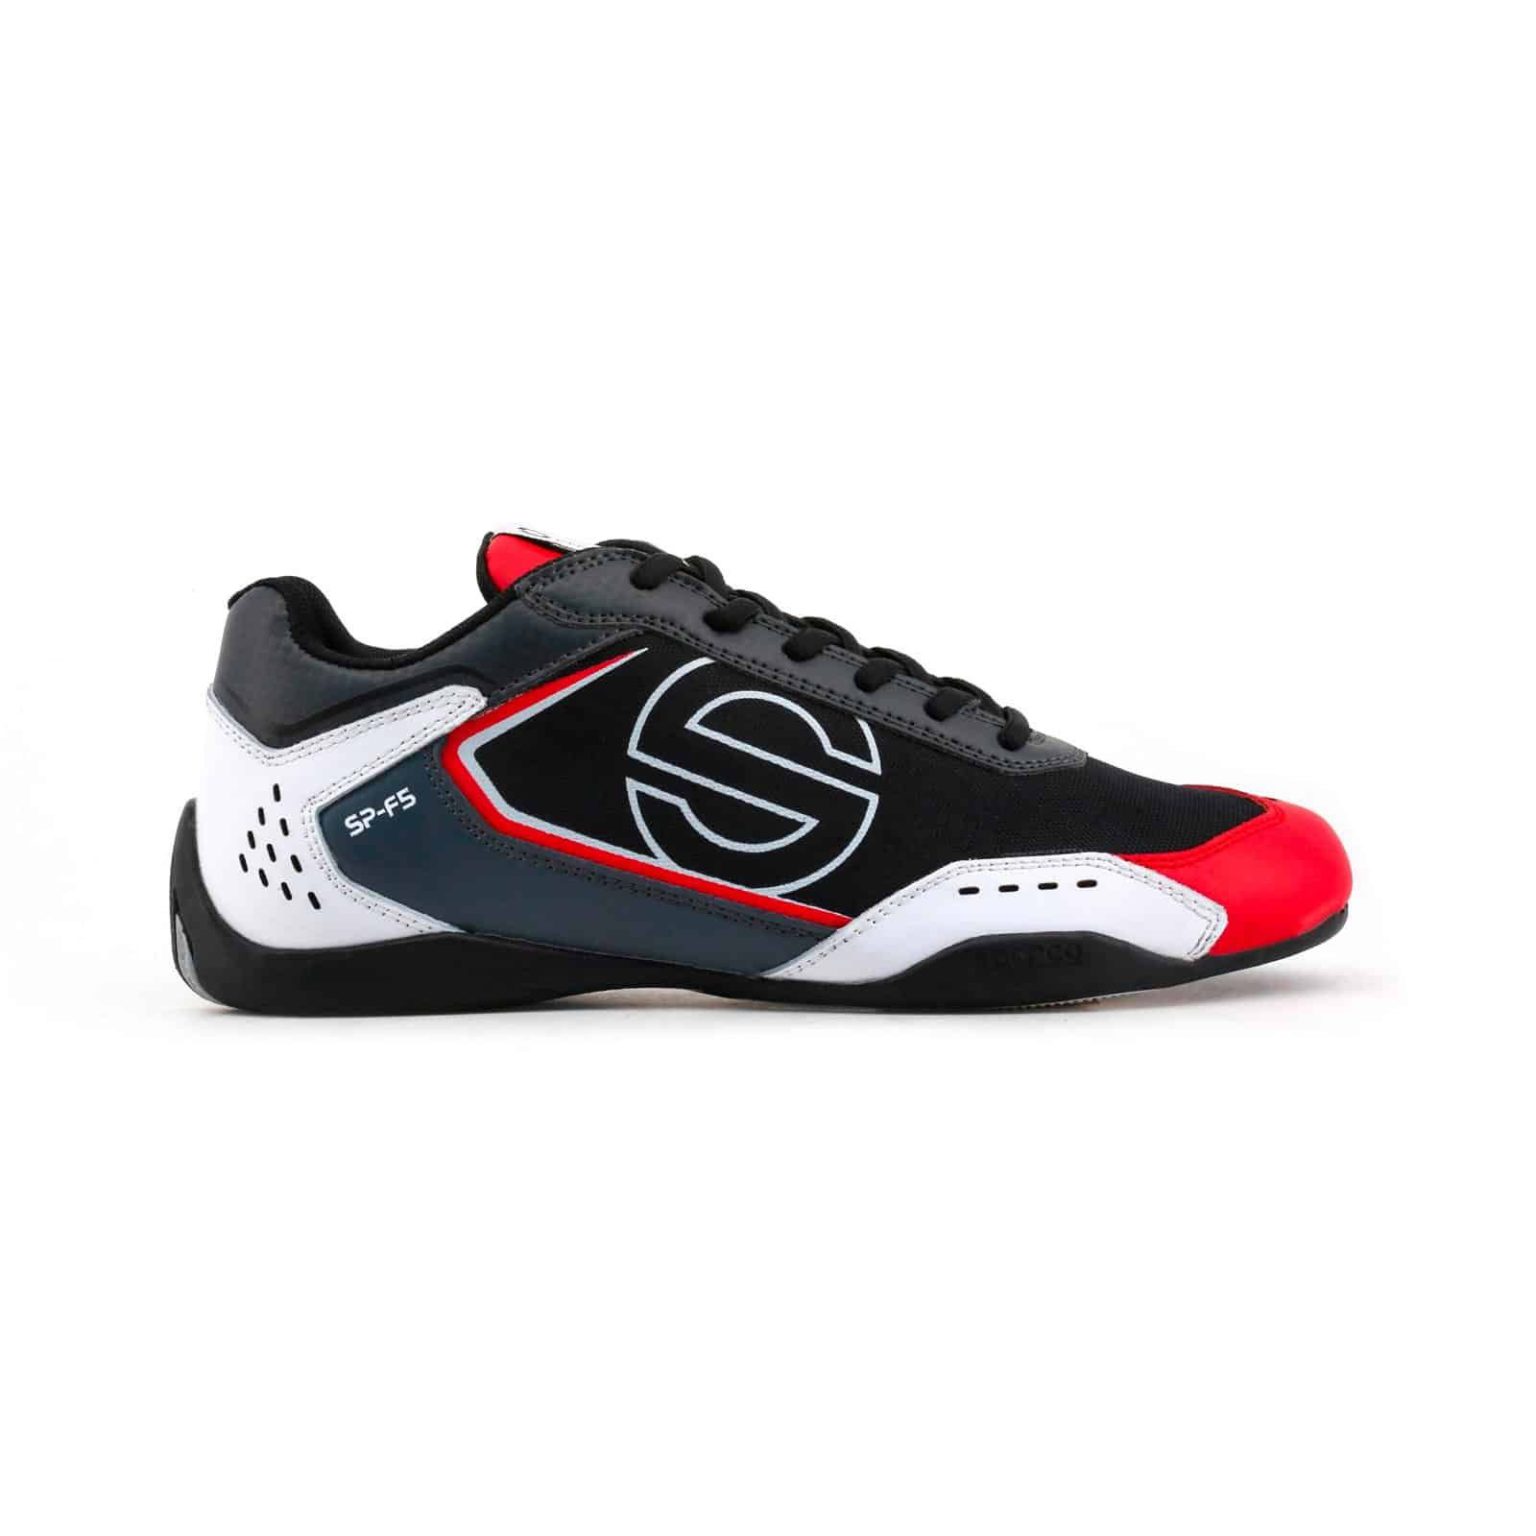 Sparco SP-F5 White/Black/Red Shoes Sneakers in Leather » Sparco Fashion ...